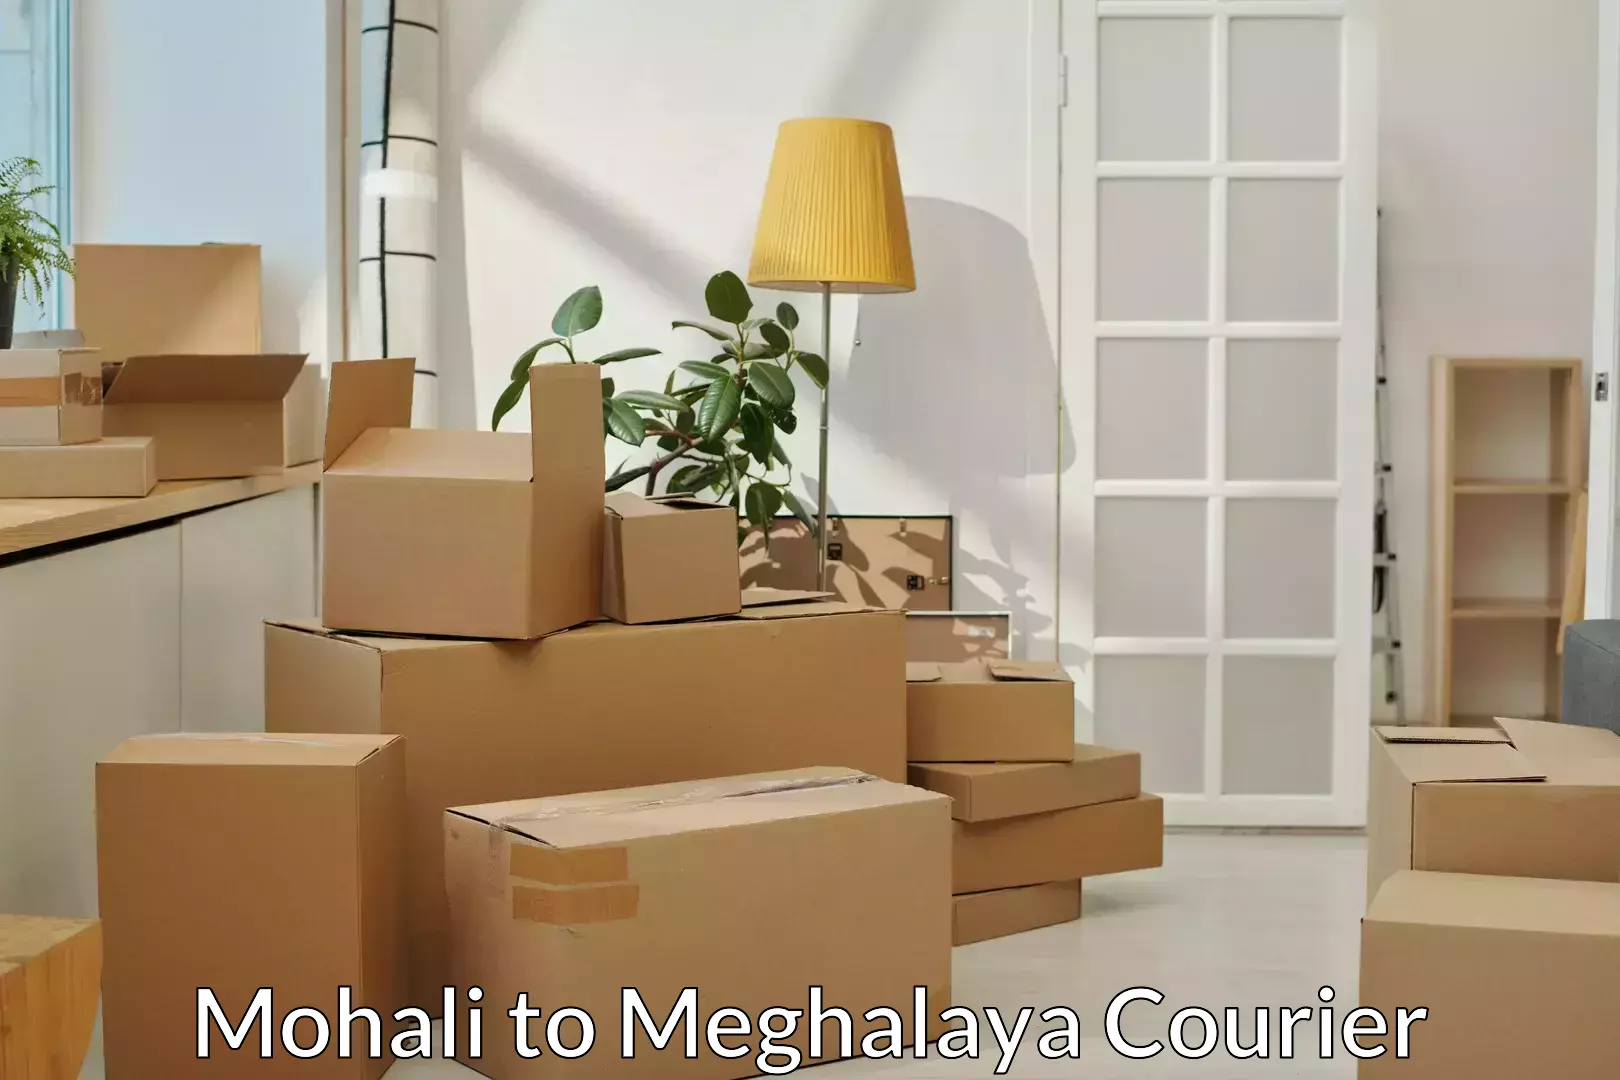 Professional movers in Mohali to Shillong